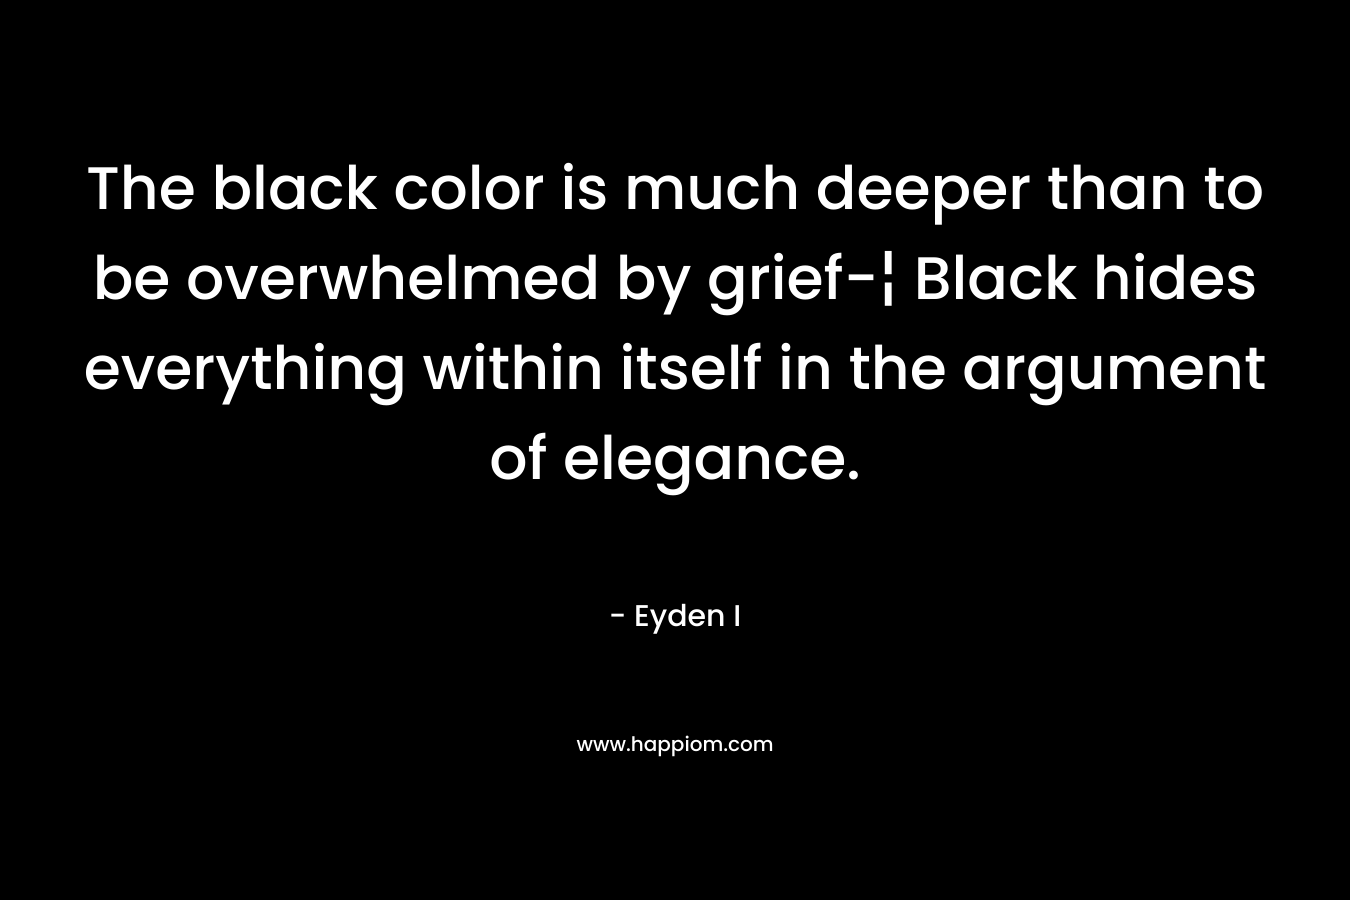 The black color is much deeper than to be overwhelmed by grief-¦ Black hides everything within itself in the argument of elegance. – Eyden I